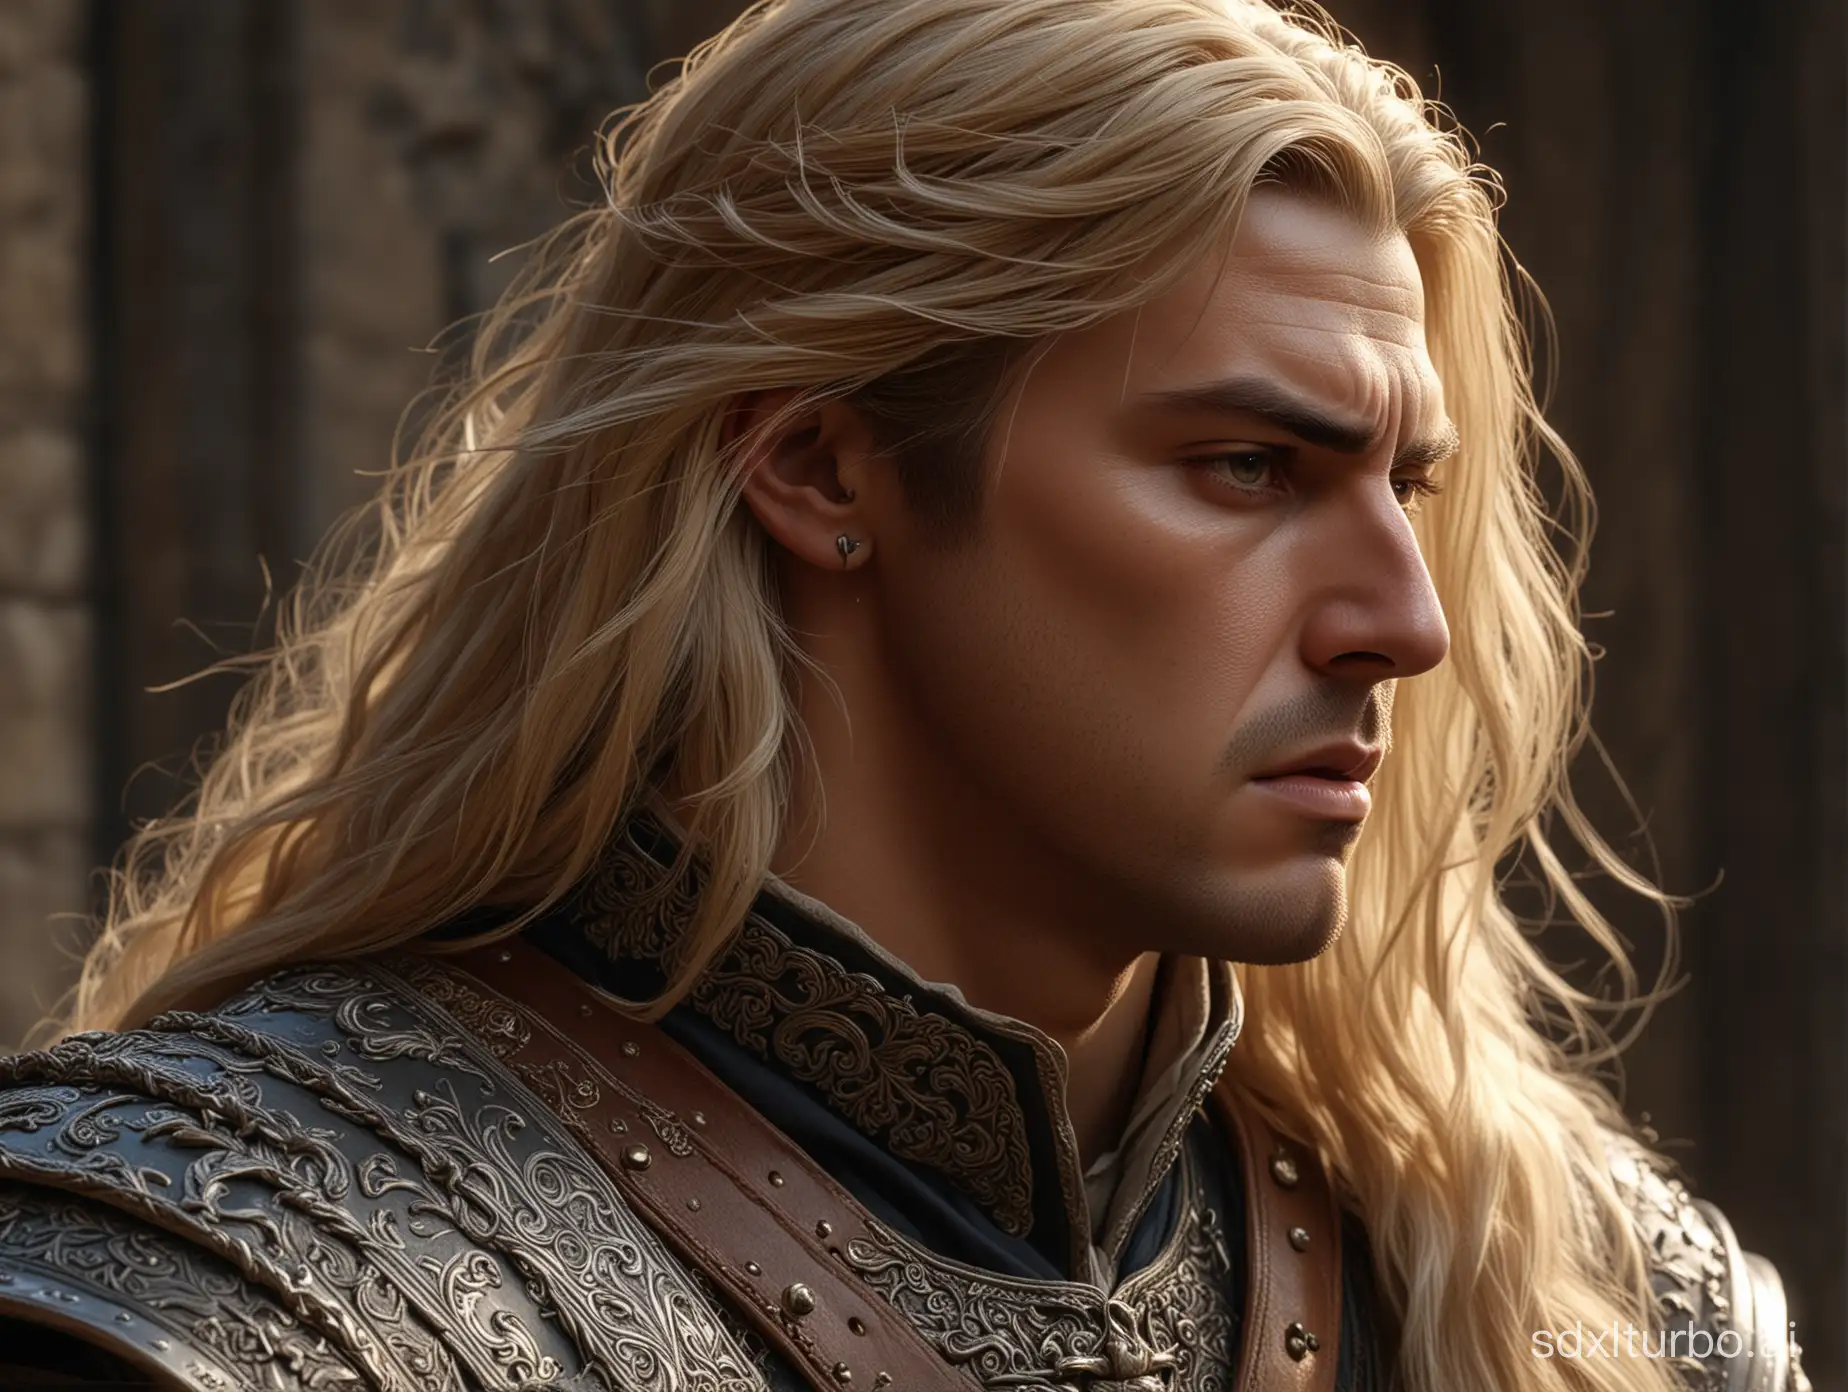 Medieval-Nobleman-with-Long-Blond-Hair-in-Exquisite-Costume